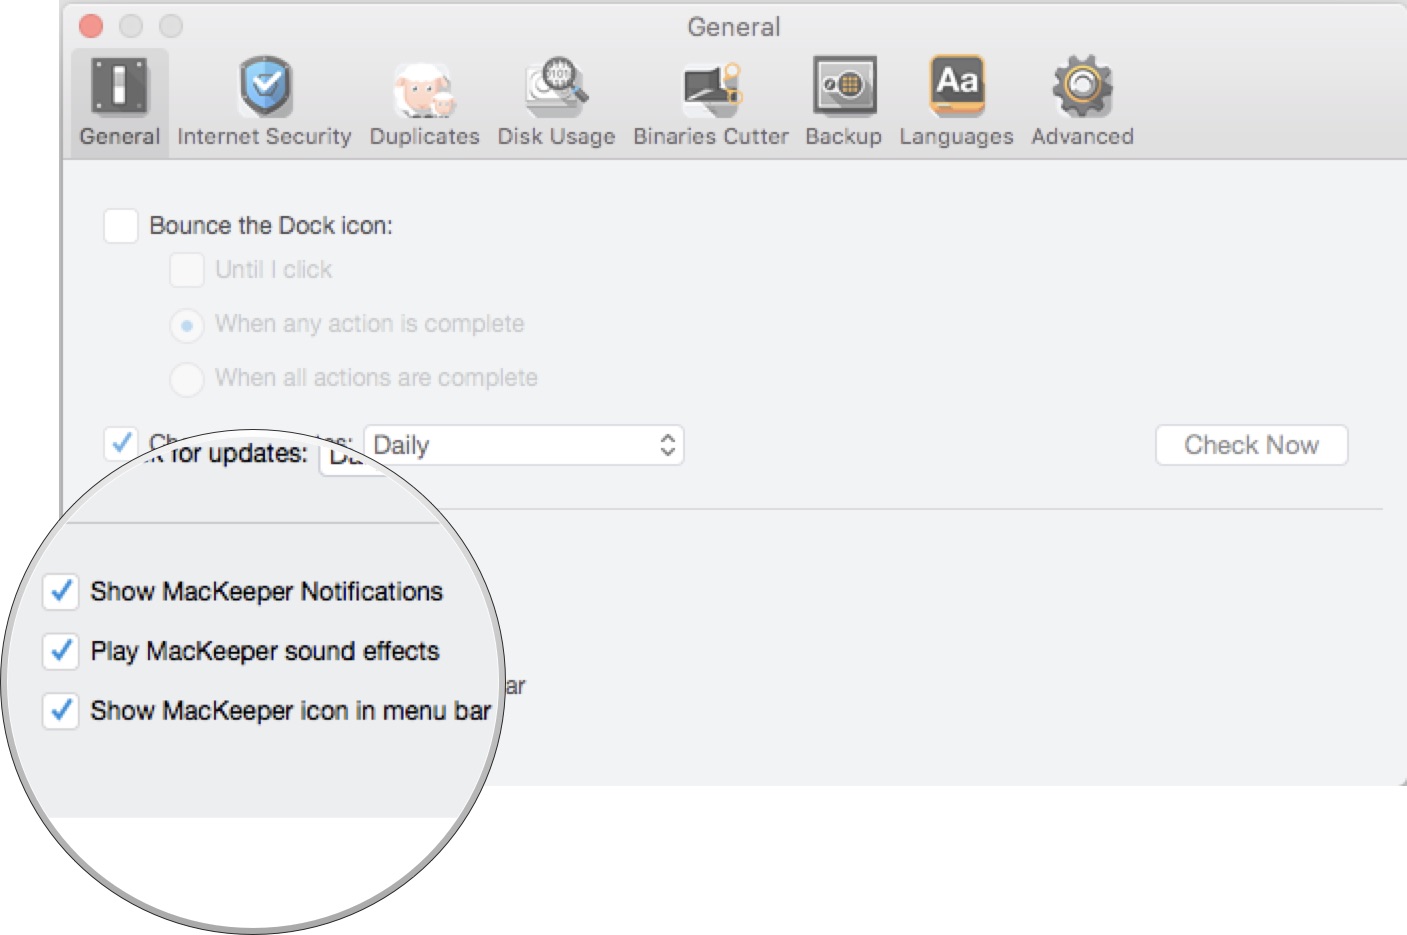 Uncheck the box for Show MacKeeper icon in menu bar